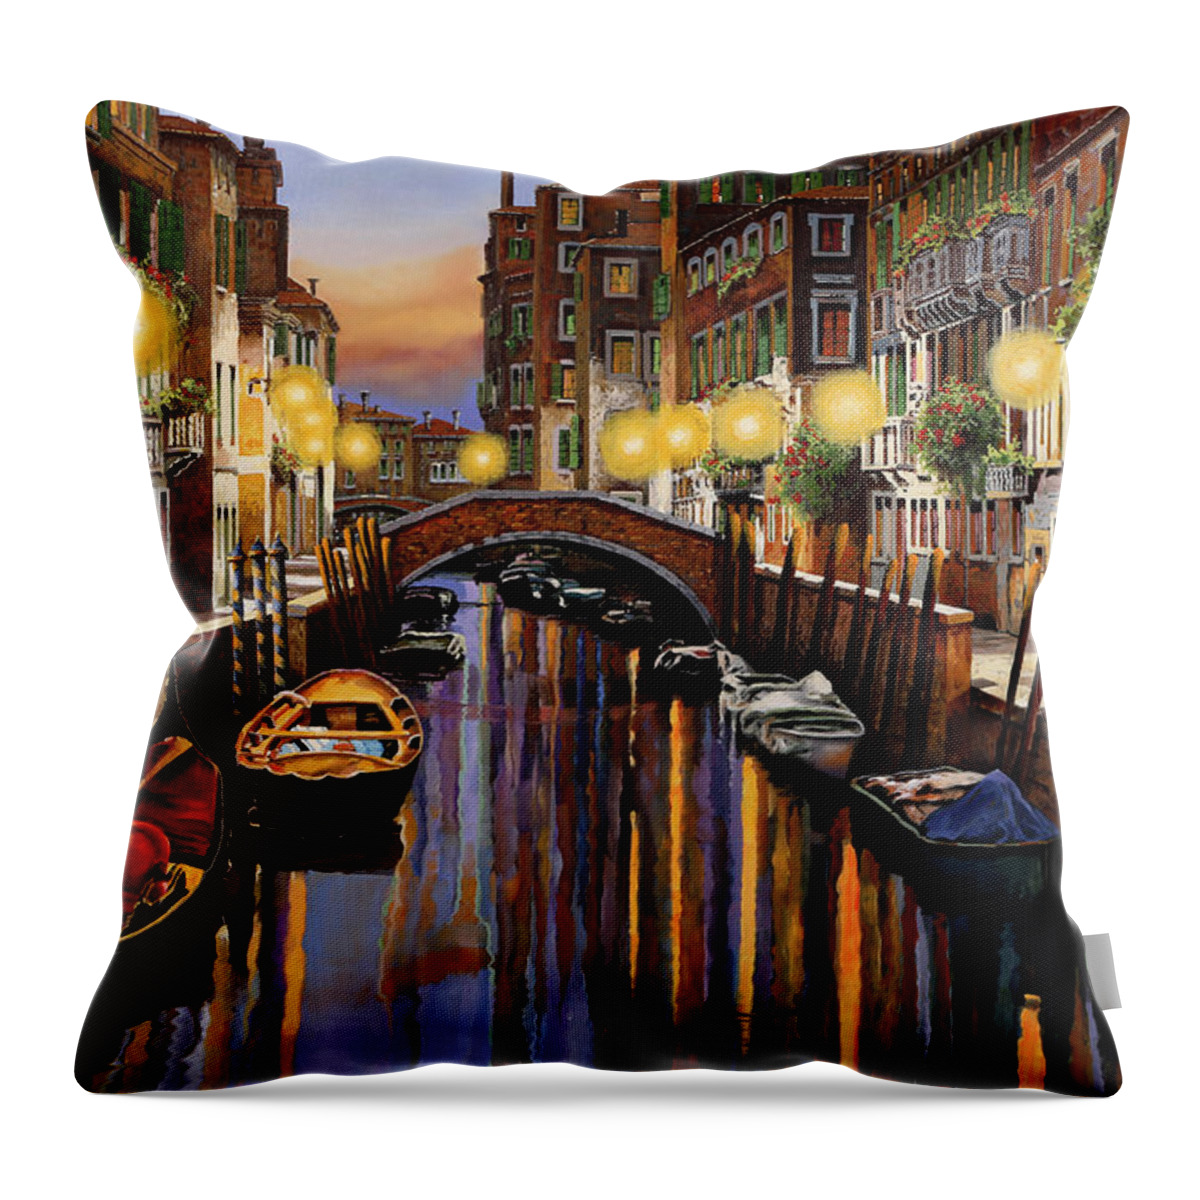 Venice Throw Pillow featuring the painting Venice at Dusk by Guido Borelli